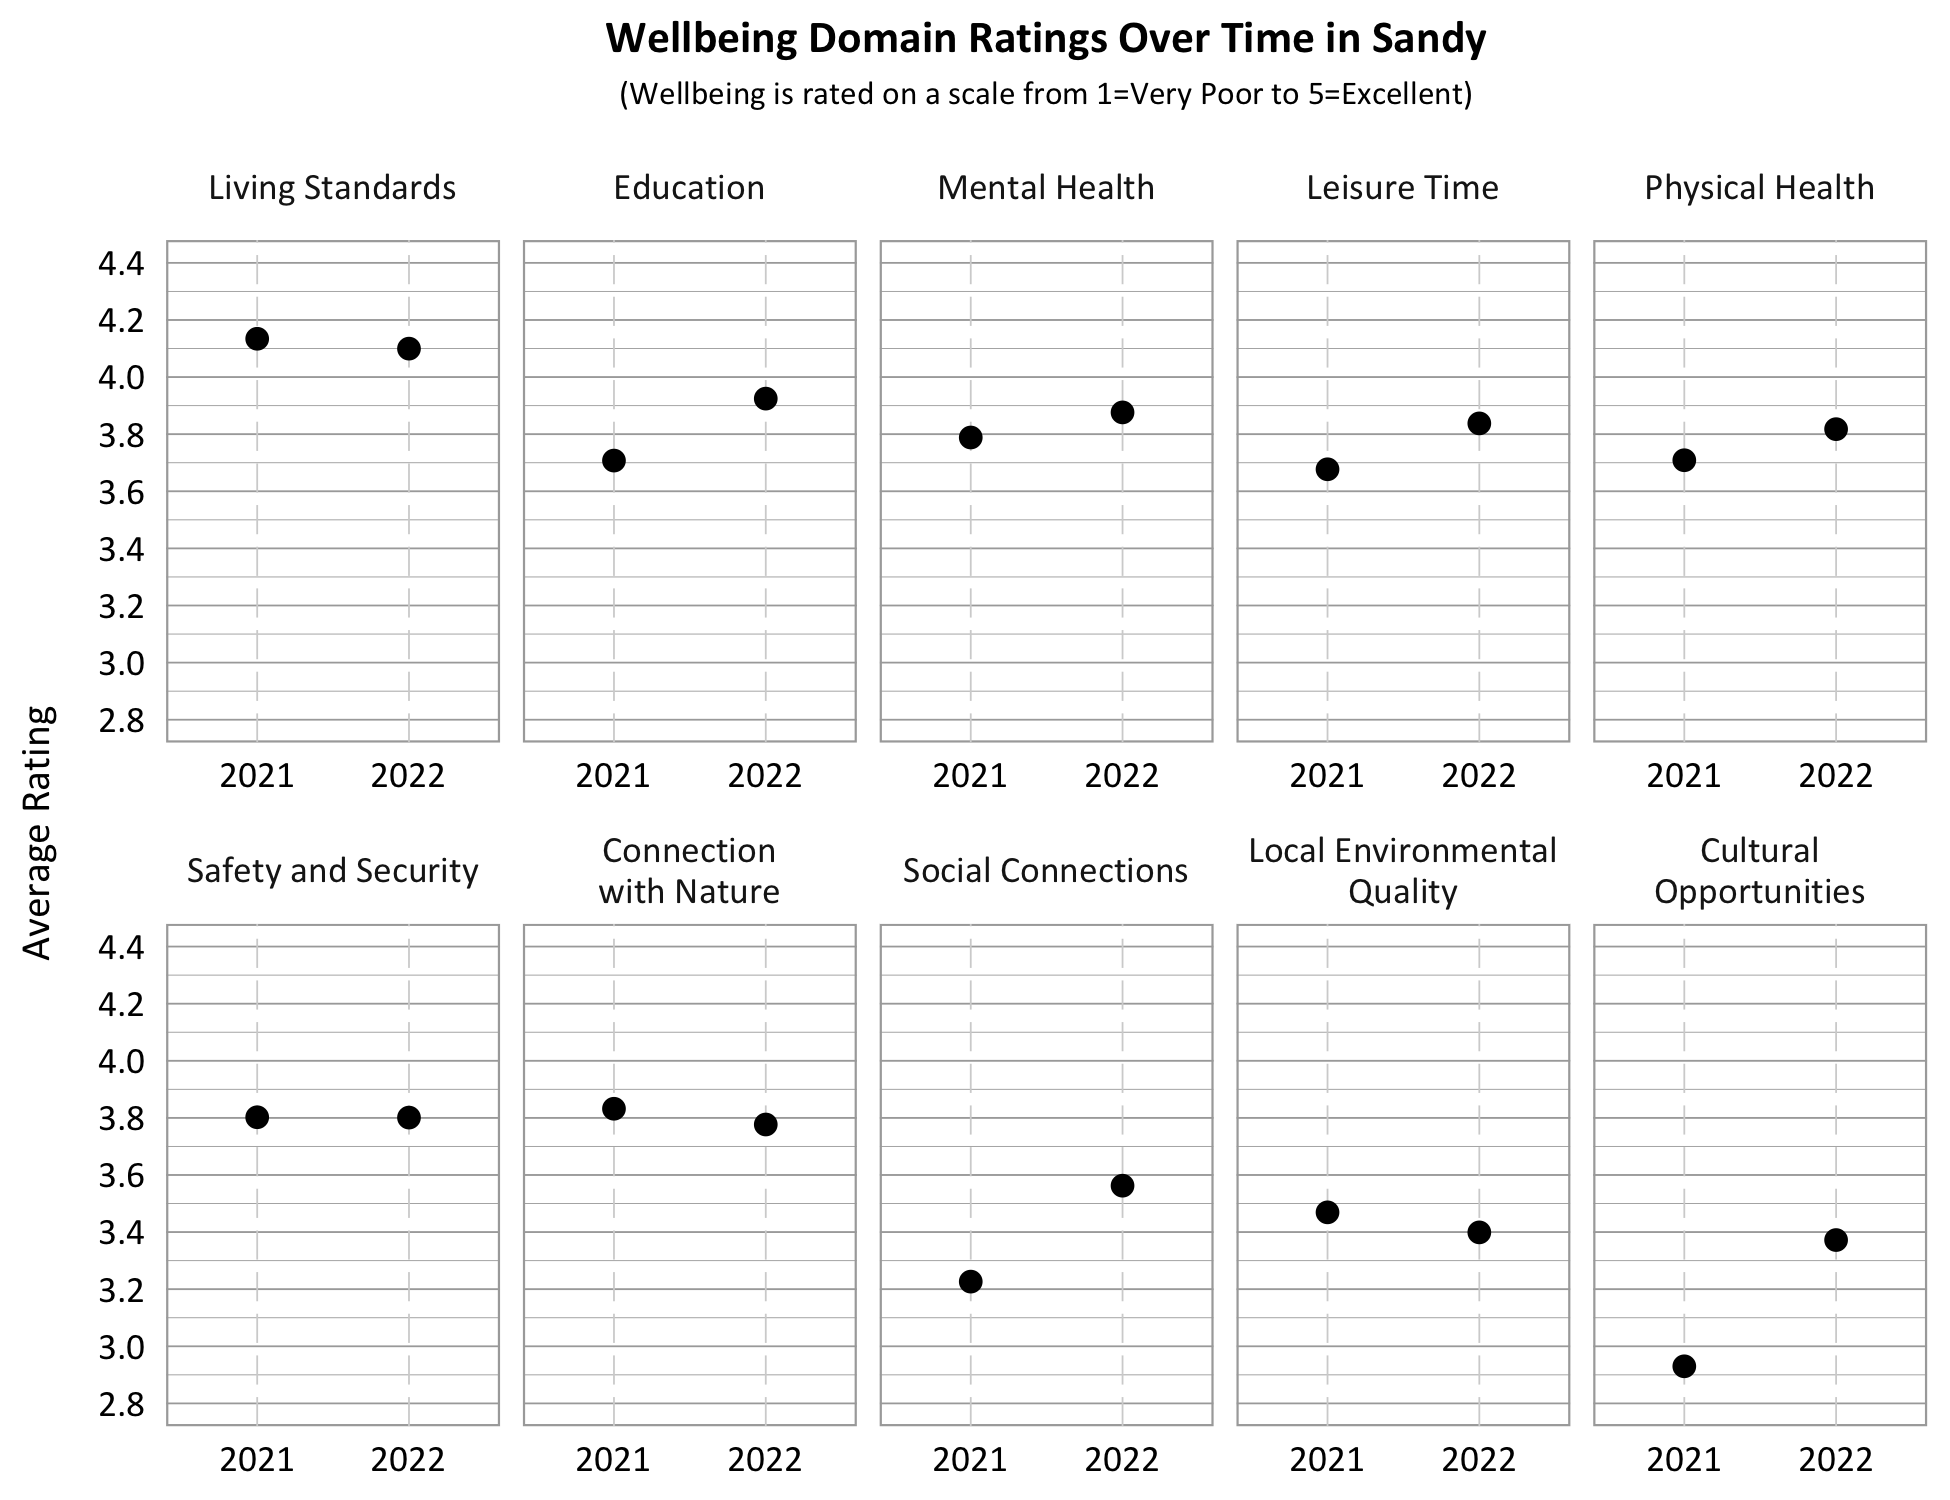 Dot Plot. Title: Wellbeing Domain Ratings Over Time in Sandy, Subtitle: Wellbeing is rated on a scale from 1=Very Poor to 5=Excellent. Category: Living Standards- 2021- 4.1, 2022- 4.1; Category: Safety and Security- 2021- 3.8, 2022- 3.8; Category: Connection with Nature- 2021- 3.8, 2022- 3.8, Category: Education- 2021- 3.7, 2022- 3.9; Category: Physical Health: 2021- 3.7; 2022 3.8; Category: Mental Health- 2021- 3.8, 2022- 3.9; Category: Local Environmental Quality- 2021- 3.5, 2022- 3.4; Category: Leisure Time- 2021- 3.7, 2022- 3.8, Category: Social Connections- 2021- 3.2; 2022- 3.6, Category: Cultural Opportunities- 2021- 2.9, 2022- 3.4. 